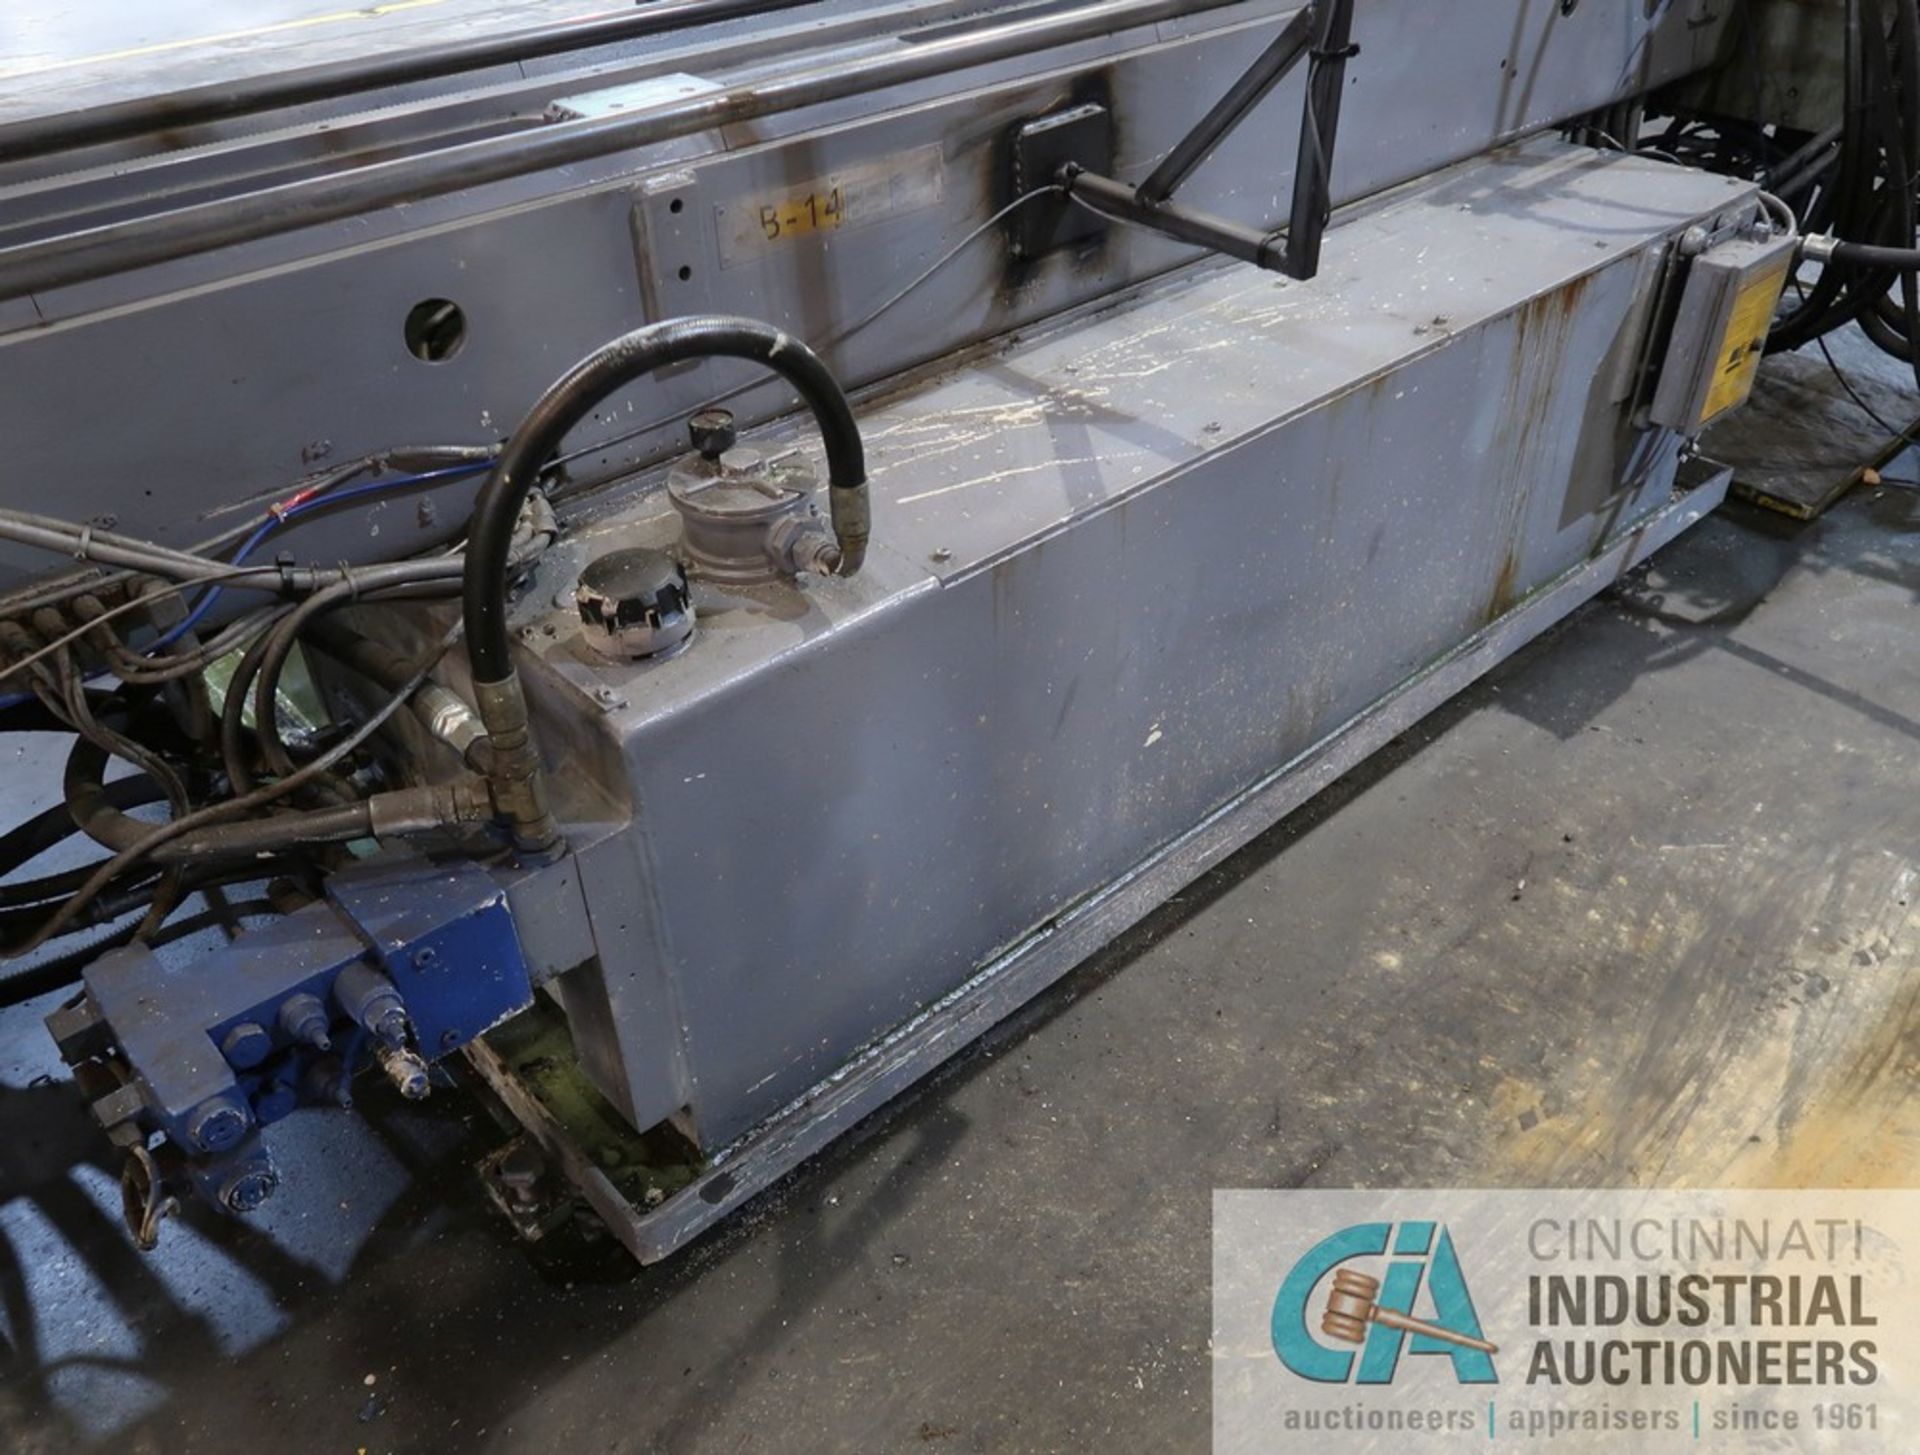 3" ADDISON DB76-ST3 MULTI-STACK 5-AXIS CNC HYDRAULIC TUBE BENDER; S/N 9952, ASSET NO. AB-14, 3" - Image 6 of 15